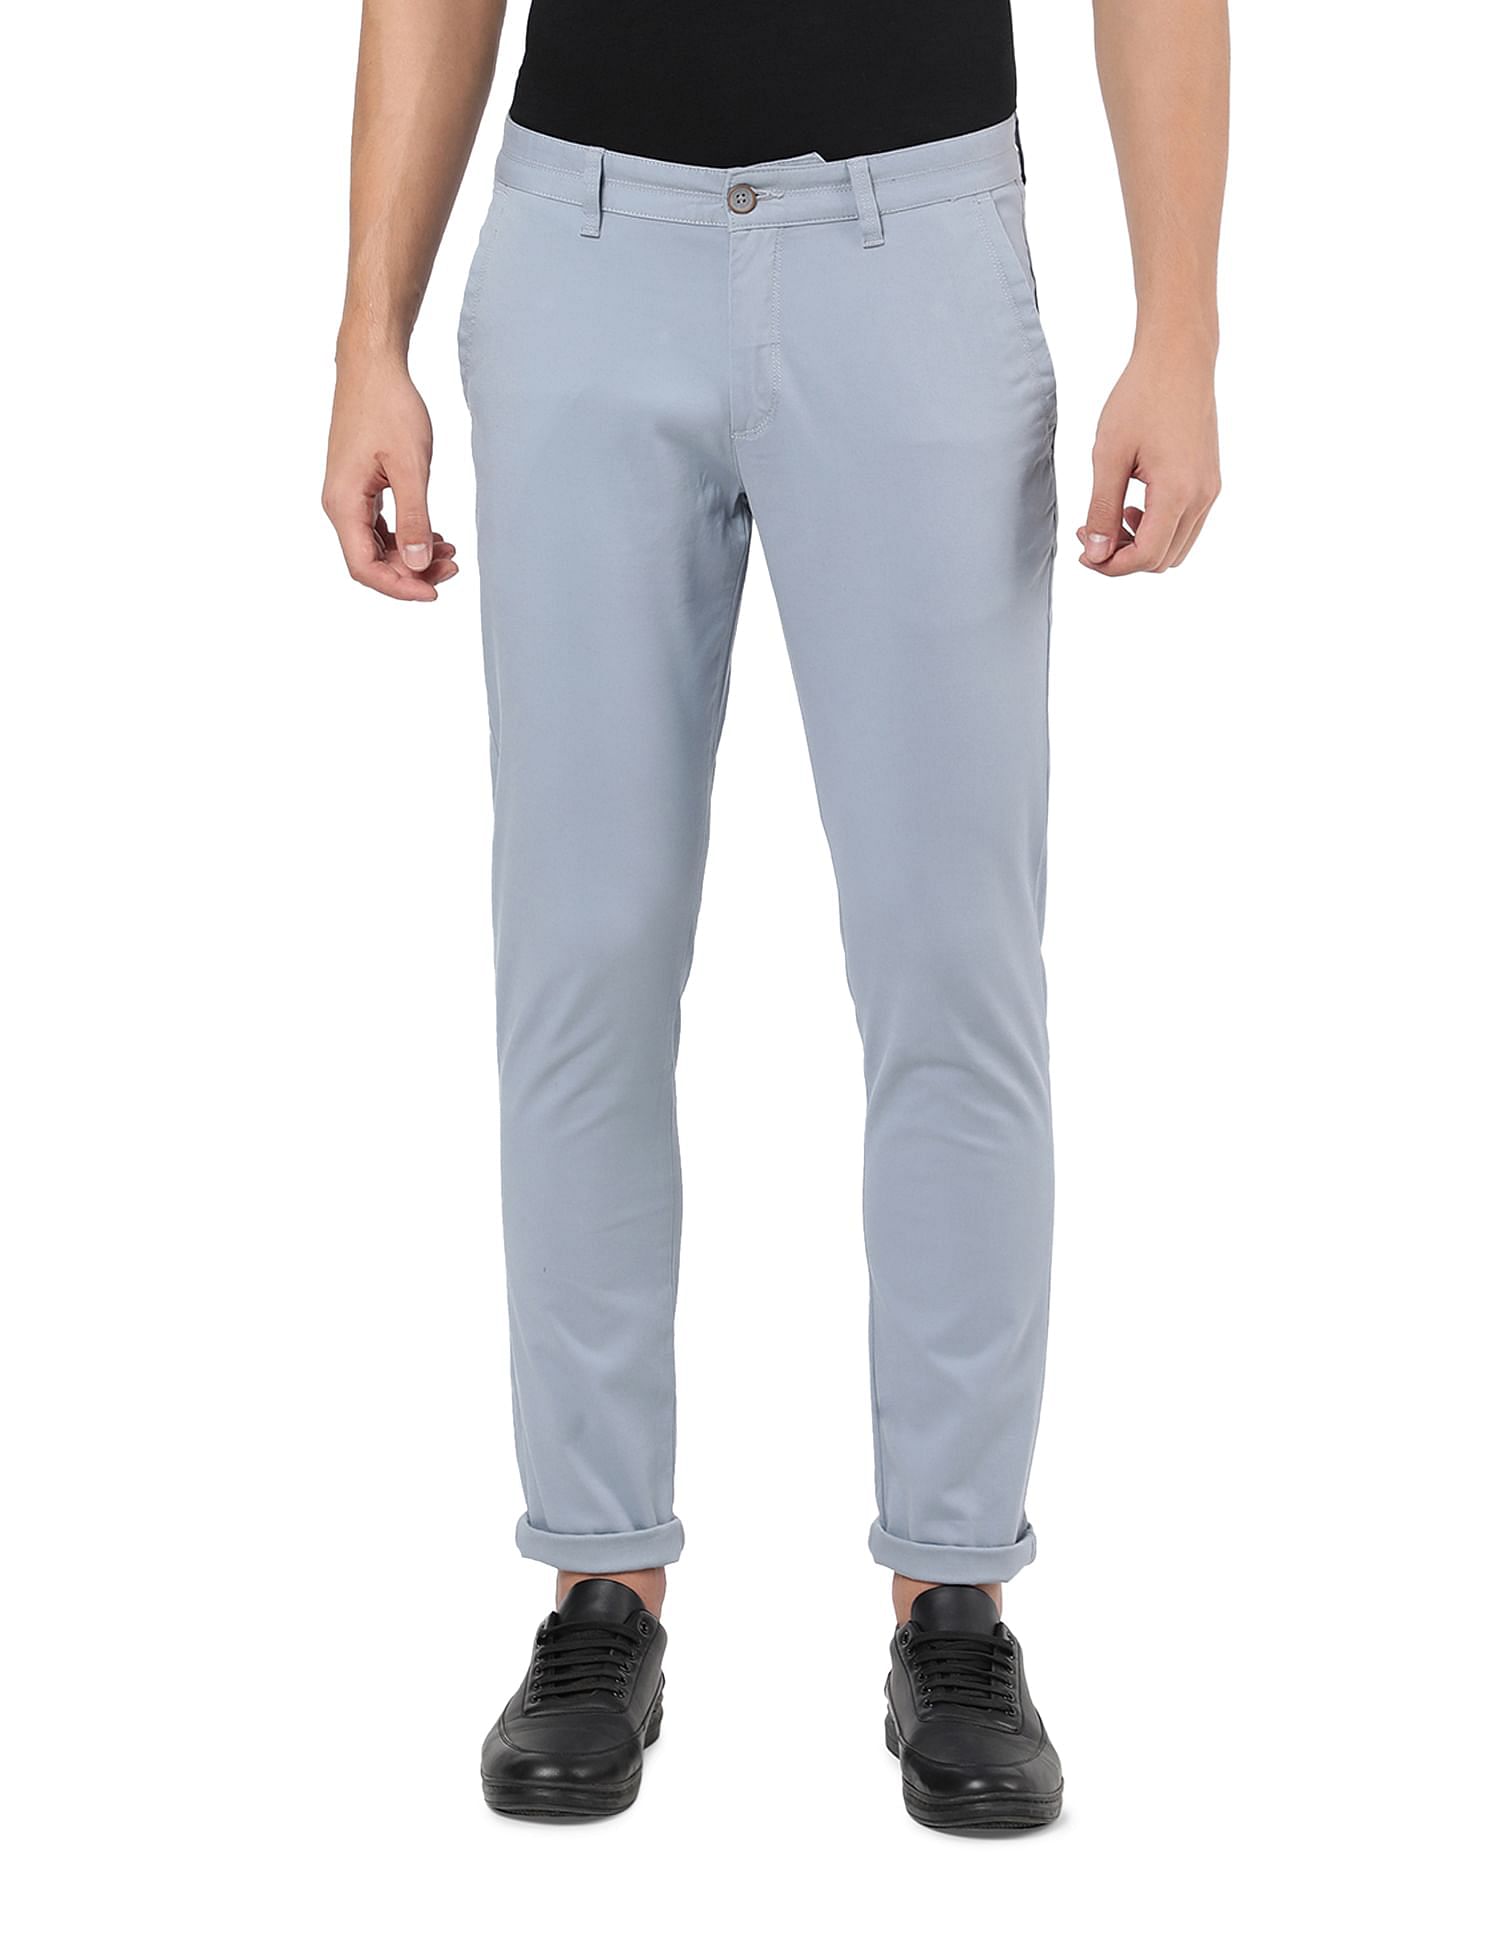 Buy French Navy Slim Stretch Chino Trousers from the Next UK online shop